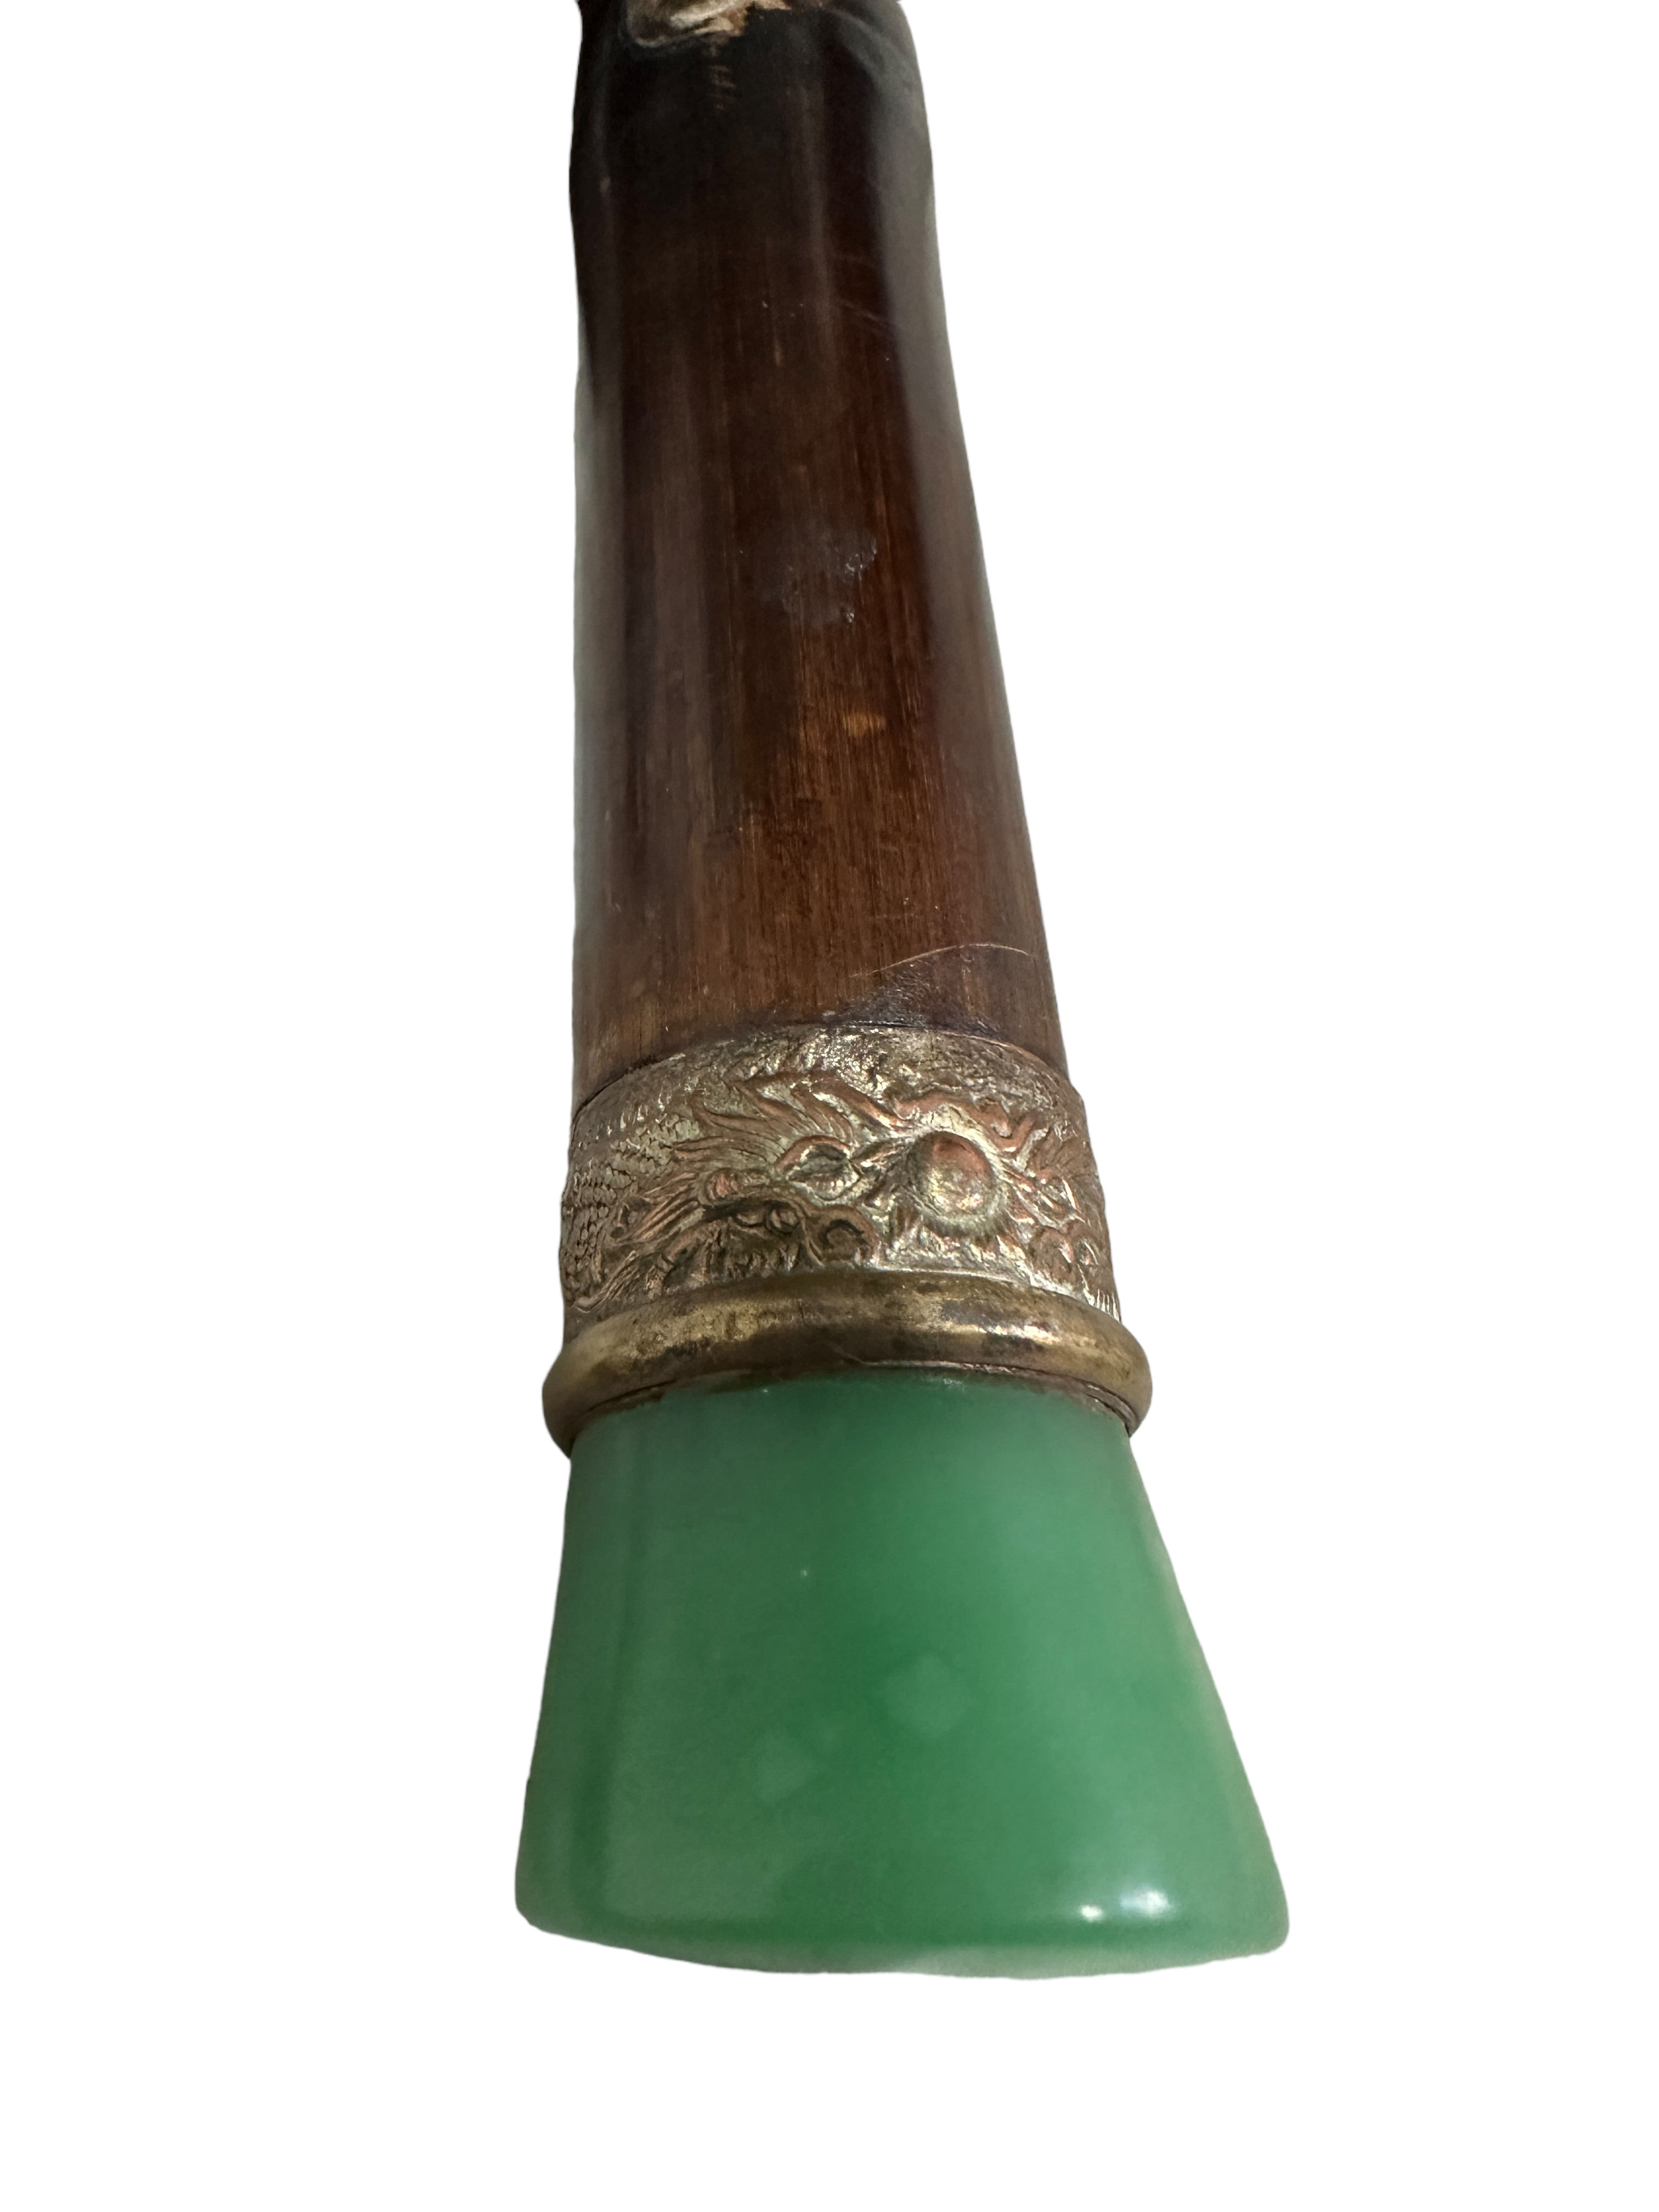 Lot of Opium Pipe with Jade Fittings on Stand-Bone and Wood Opium Pipes+2 Resin examples - Bild 4 aus 11